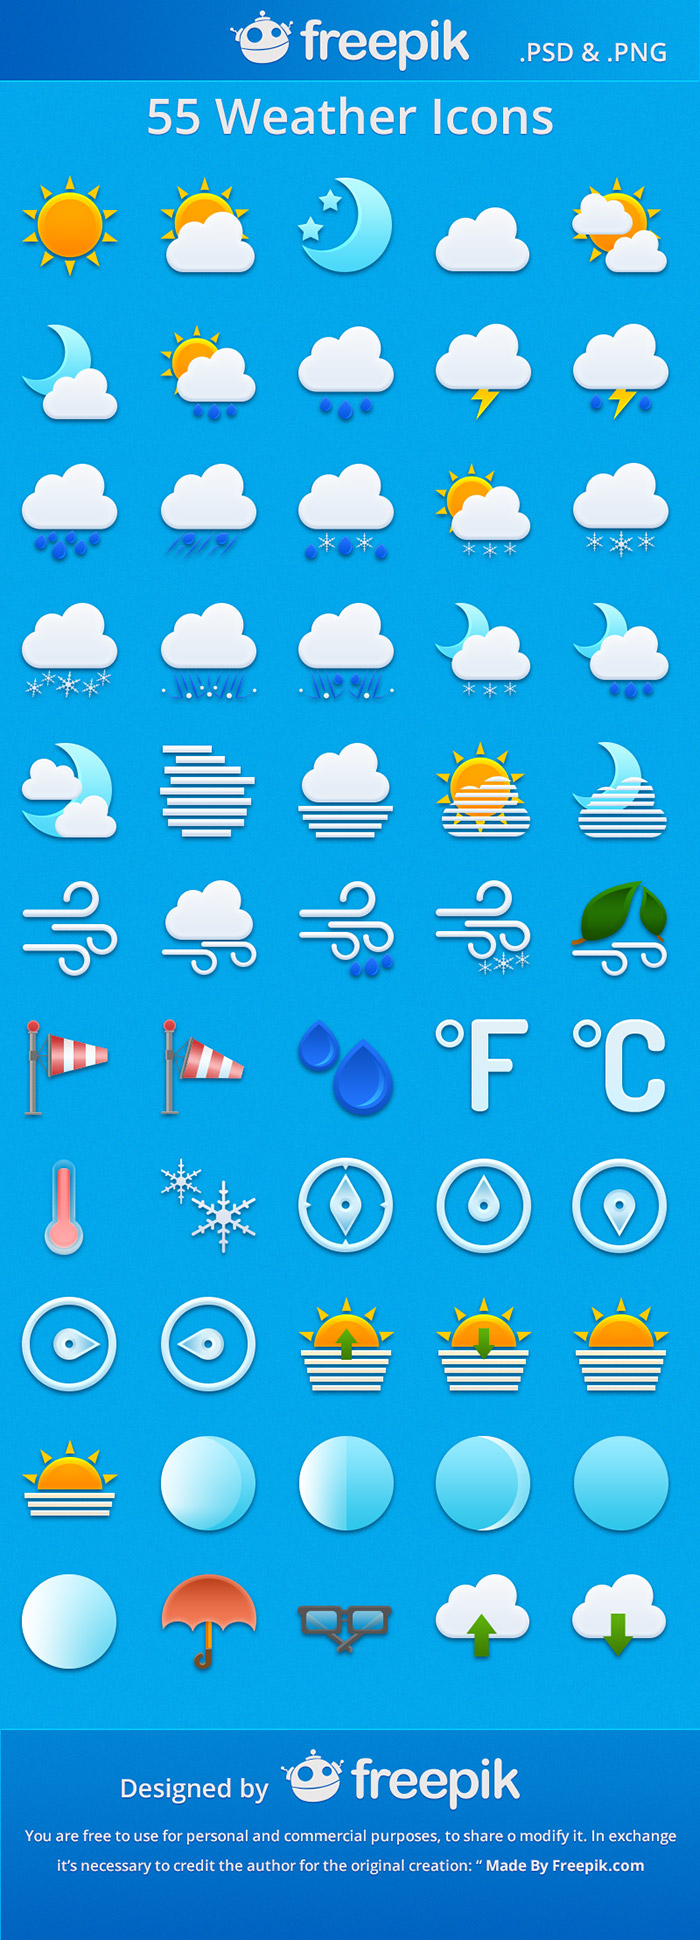 55 Free Weather Icons